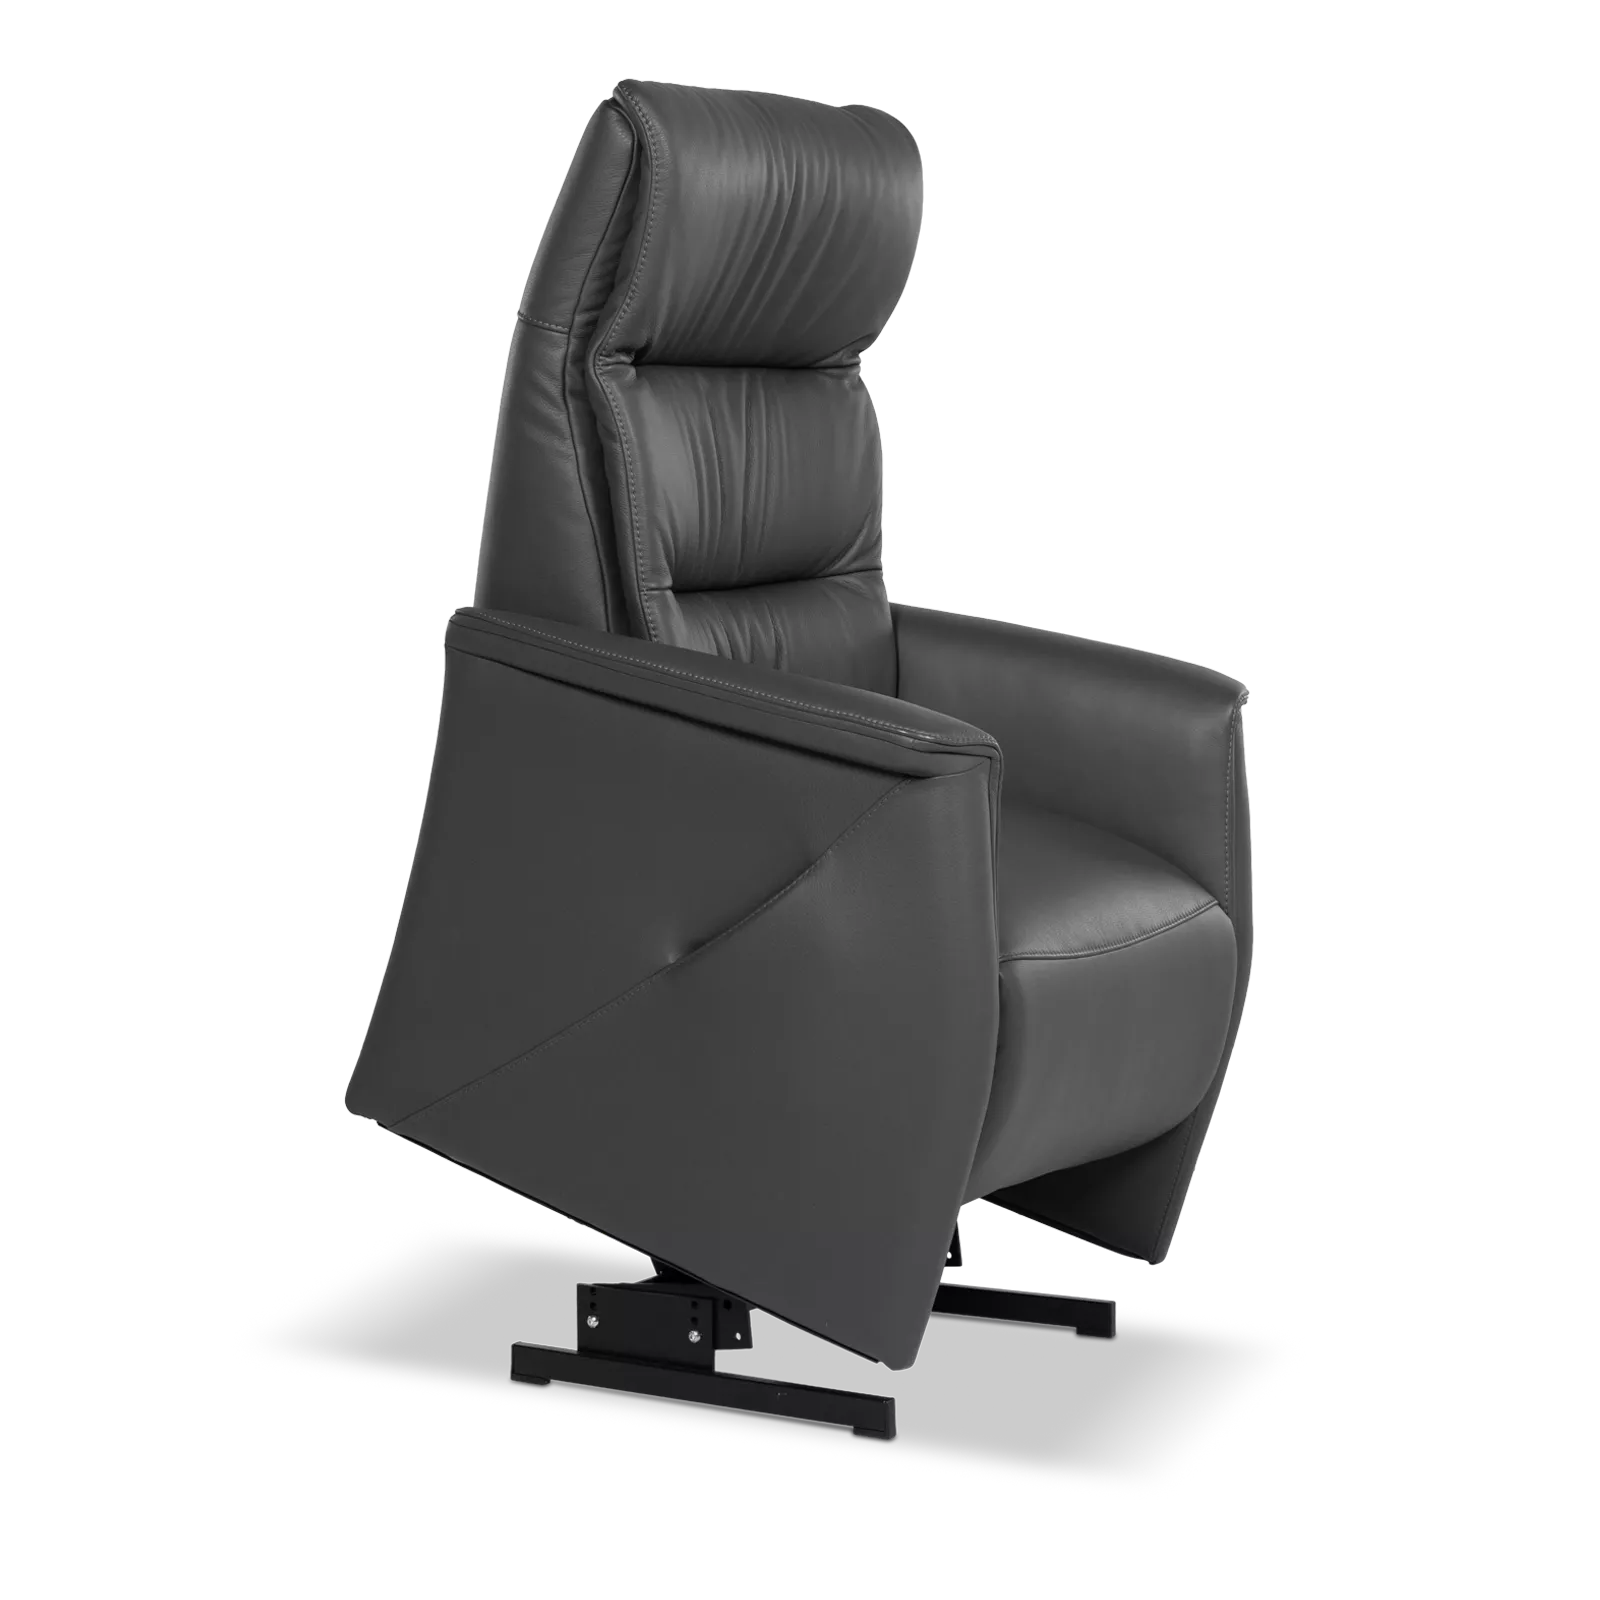 Relaxfauteuil Lounge - Massif Antraciet